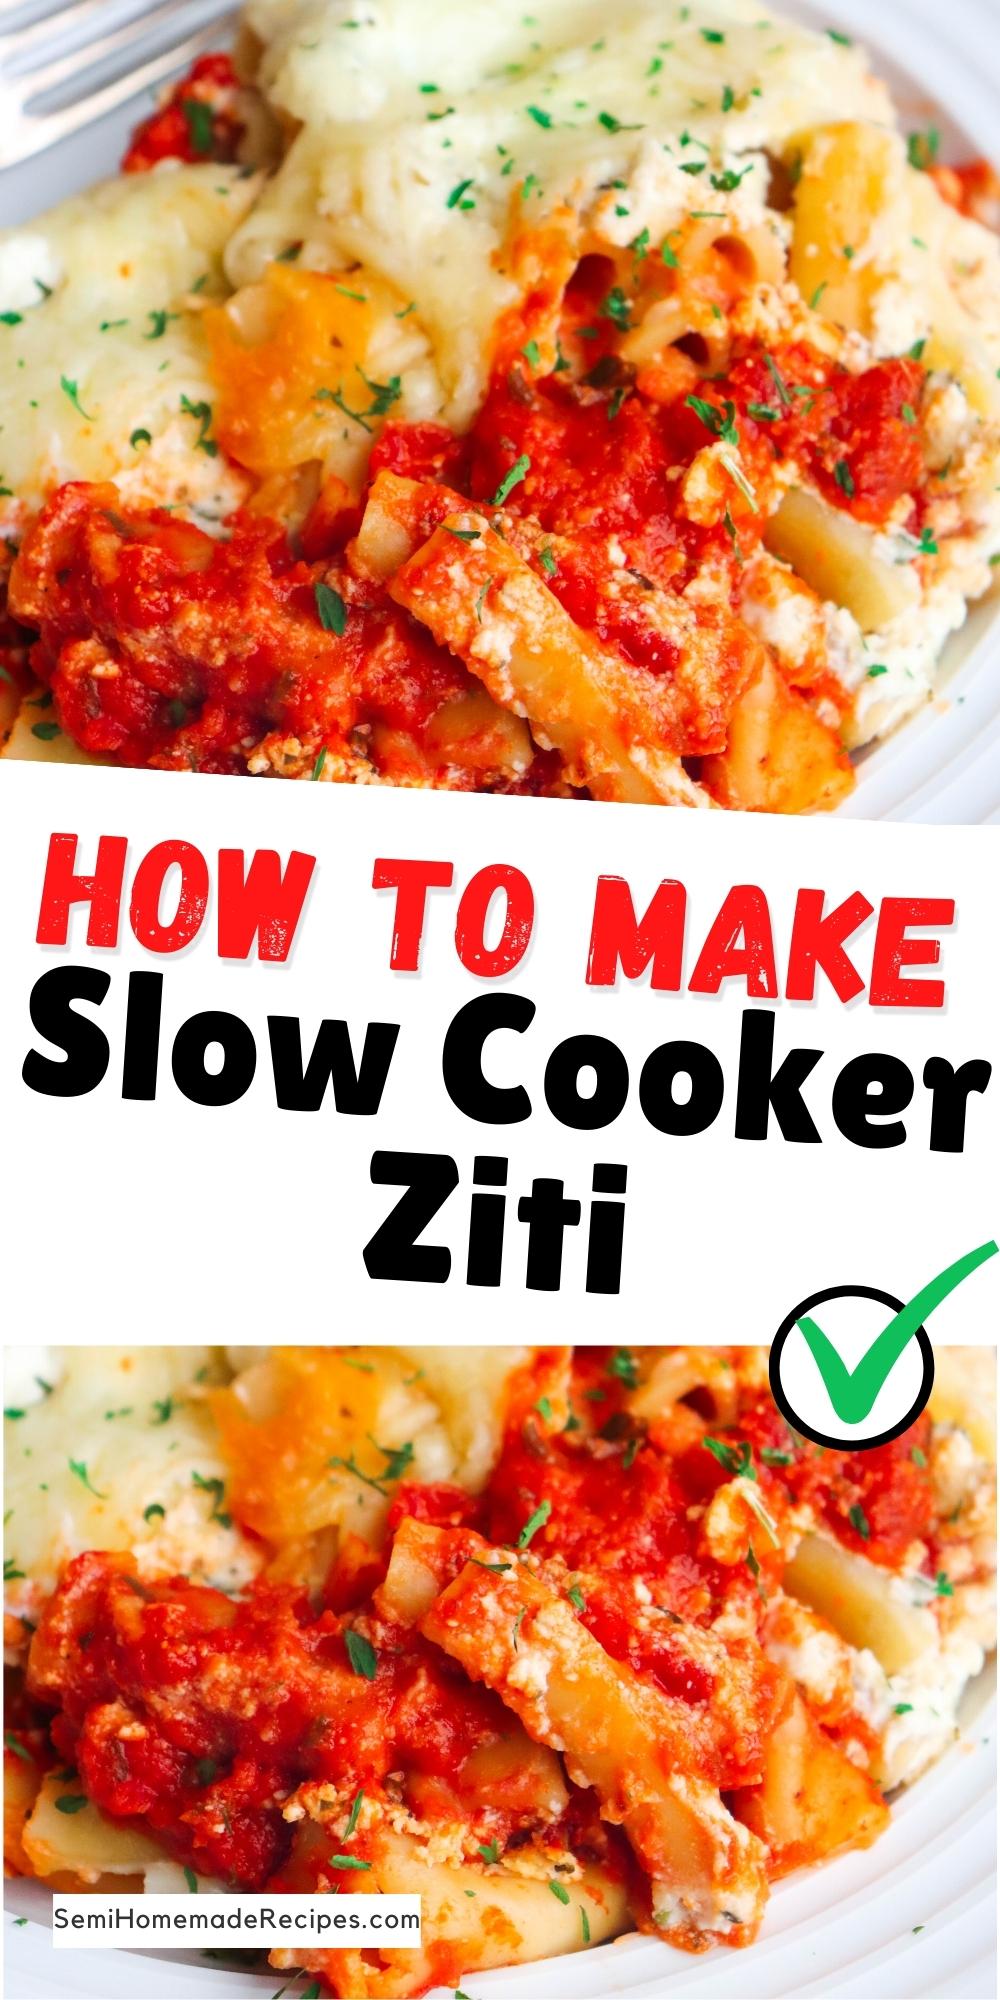 This Slow Cooker Ziti comes together in a snap and is perfect served along slices of homemade garlic bread. You'll love how easy this crock pot ziti is to toss together for lunch or dinner!